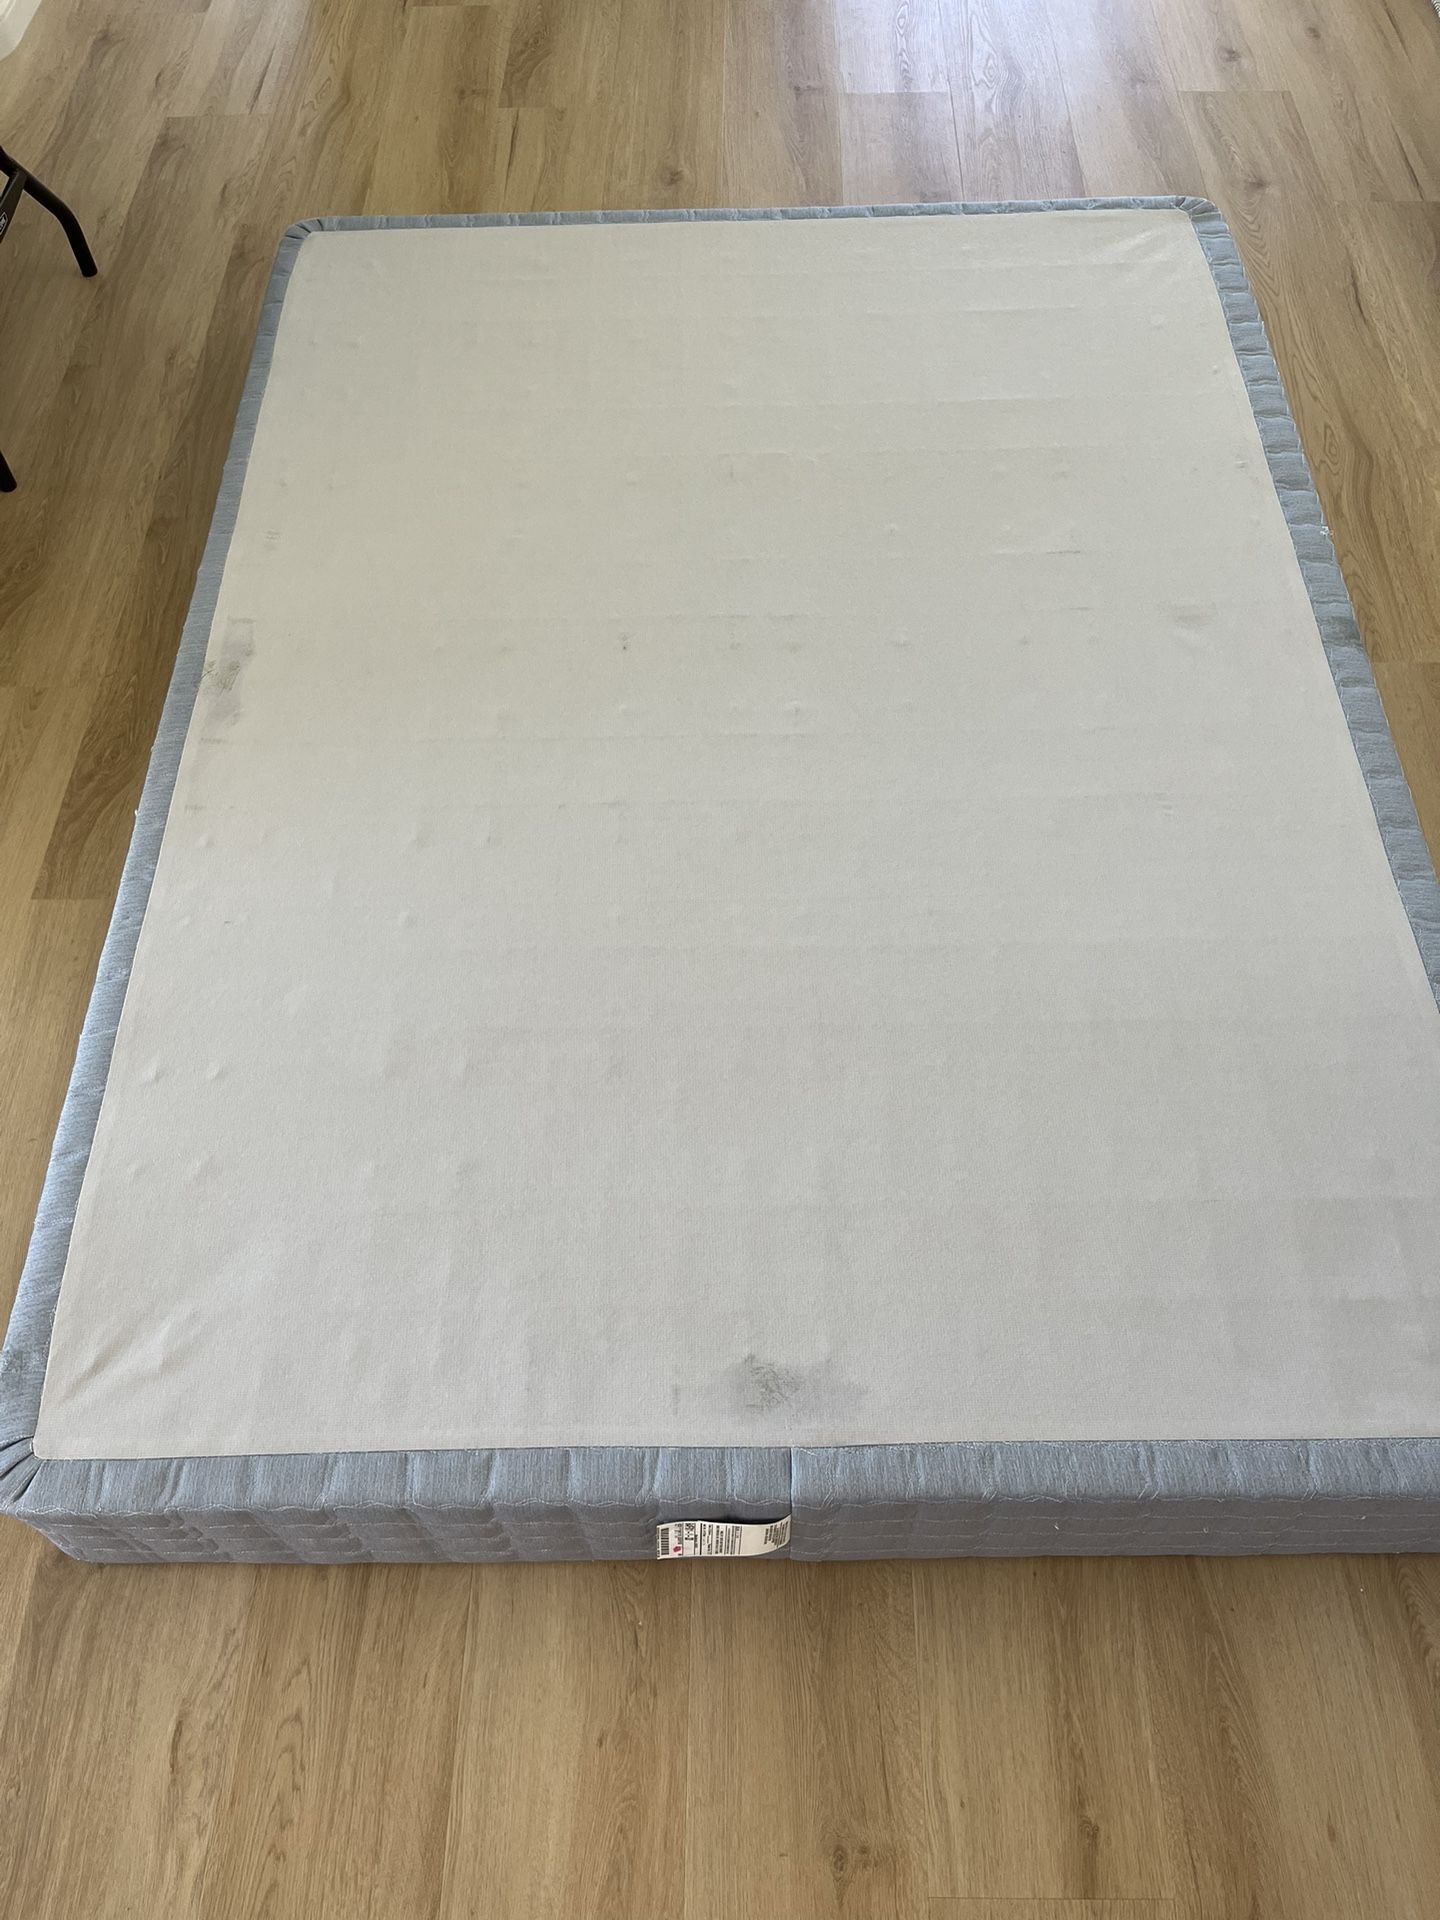 FREE—Queen Box Spring